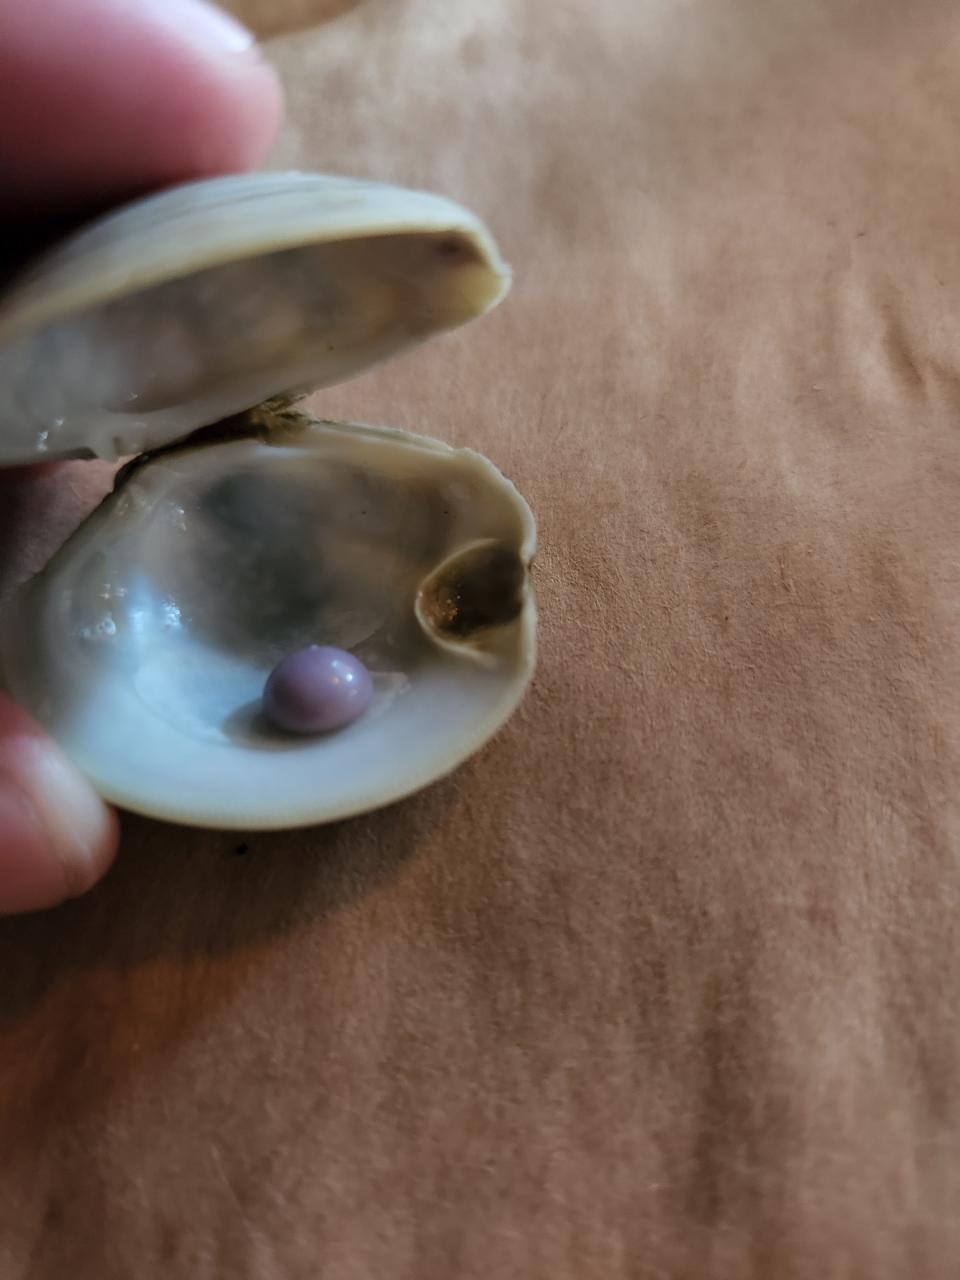 The clam in which Overland found the pearl has a visible nook, where it the pearl apparently grew.